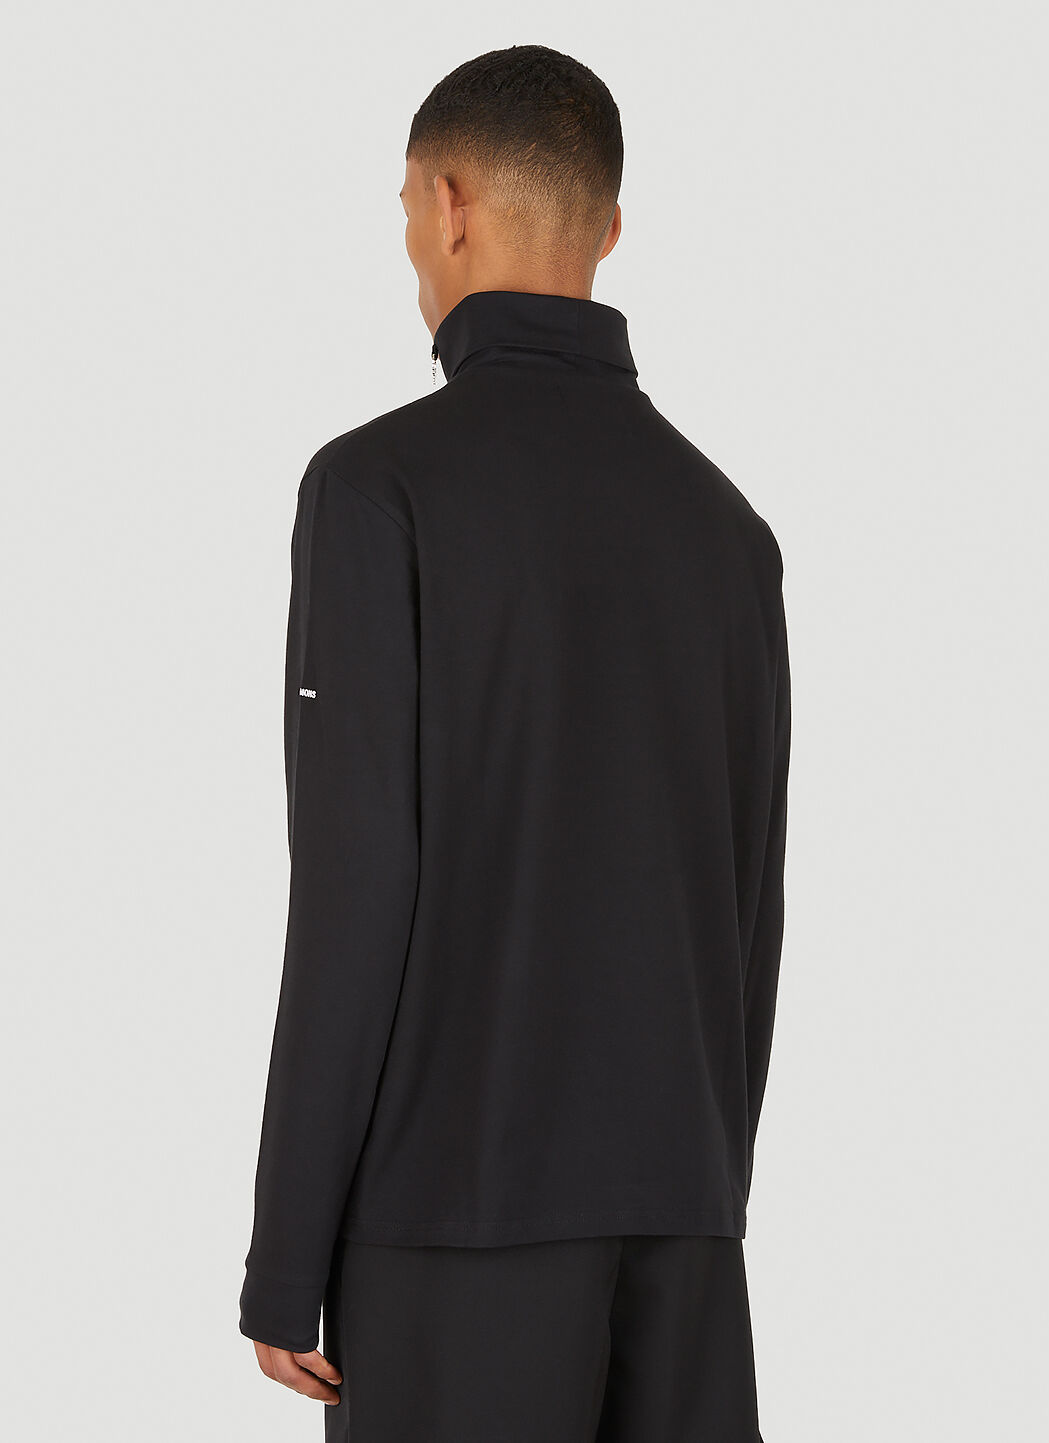 Raf Simons x Fred Perry Wreath Roll Neck Top | LN-CC